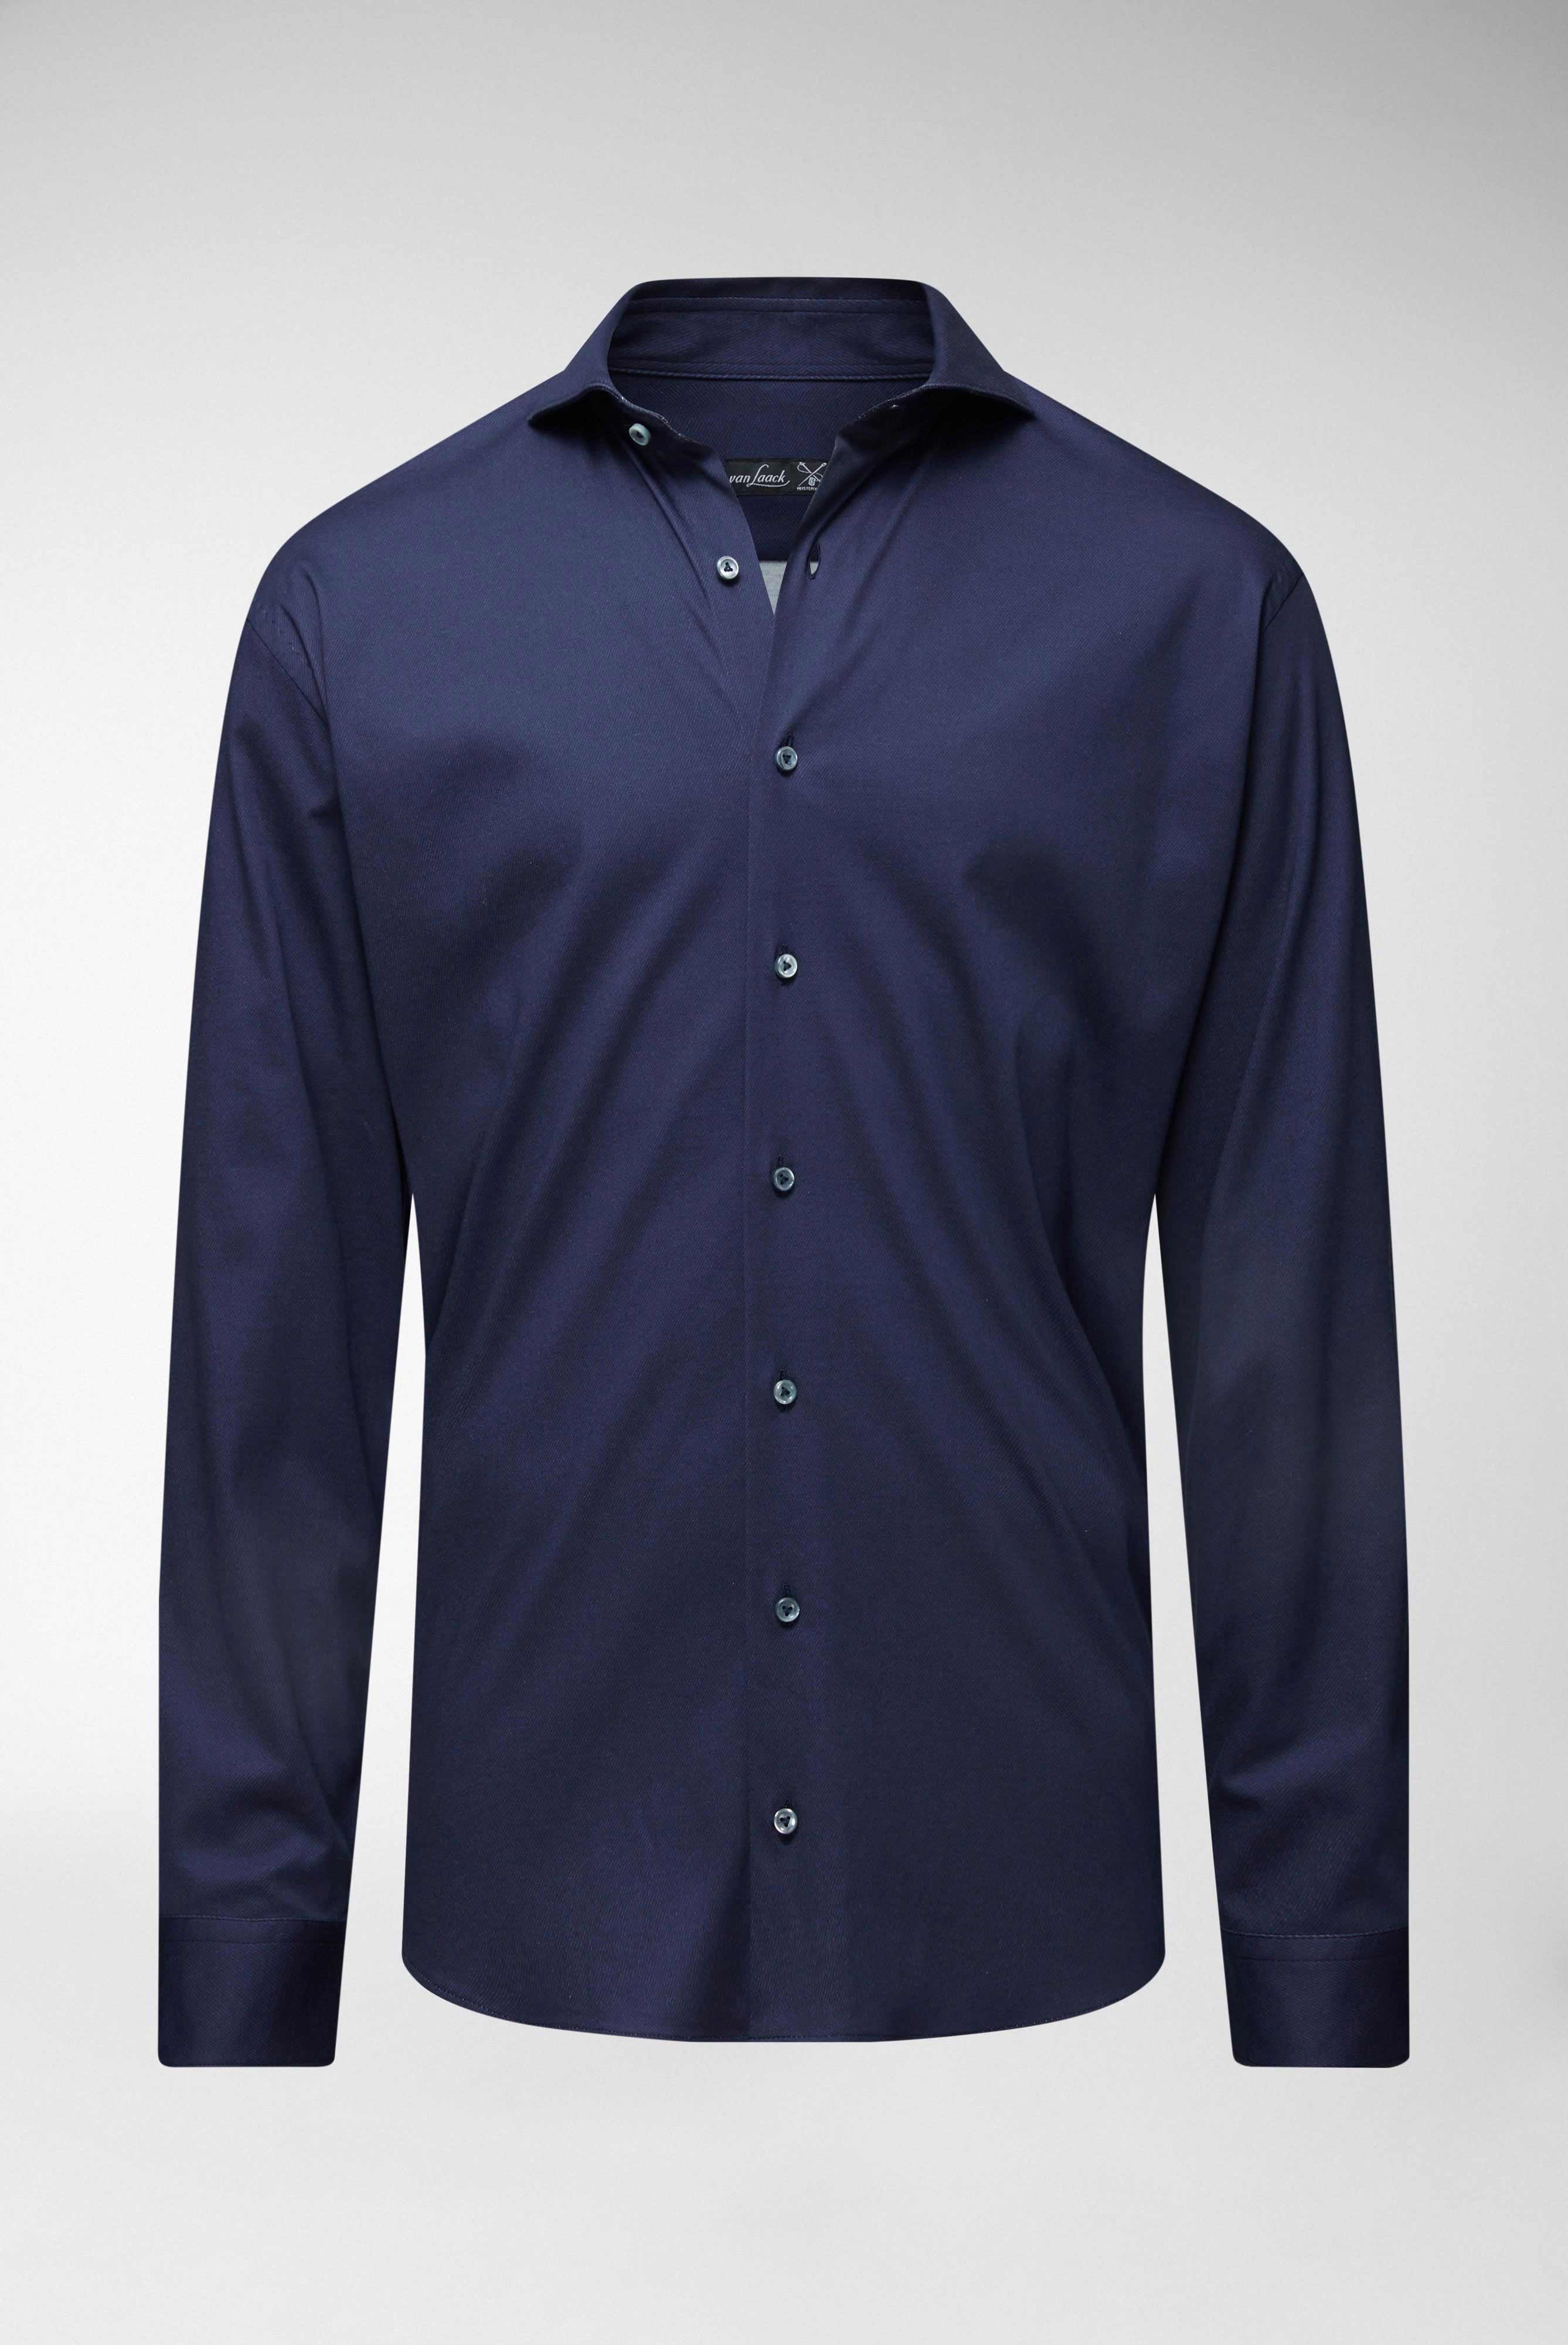 Casual Shirts+Jersey Shirt Twill Printed Tailor Fit+20.1683.UC.187749.690.S